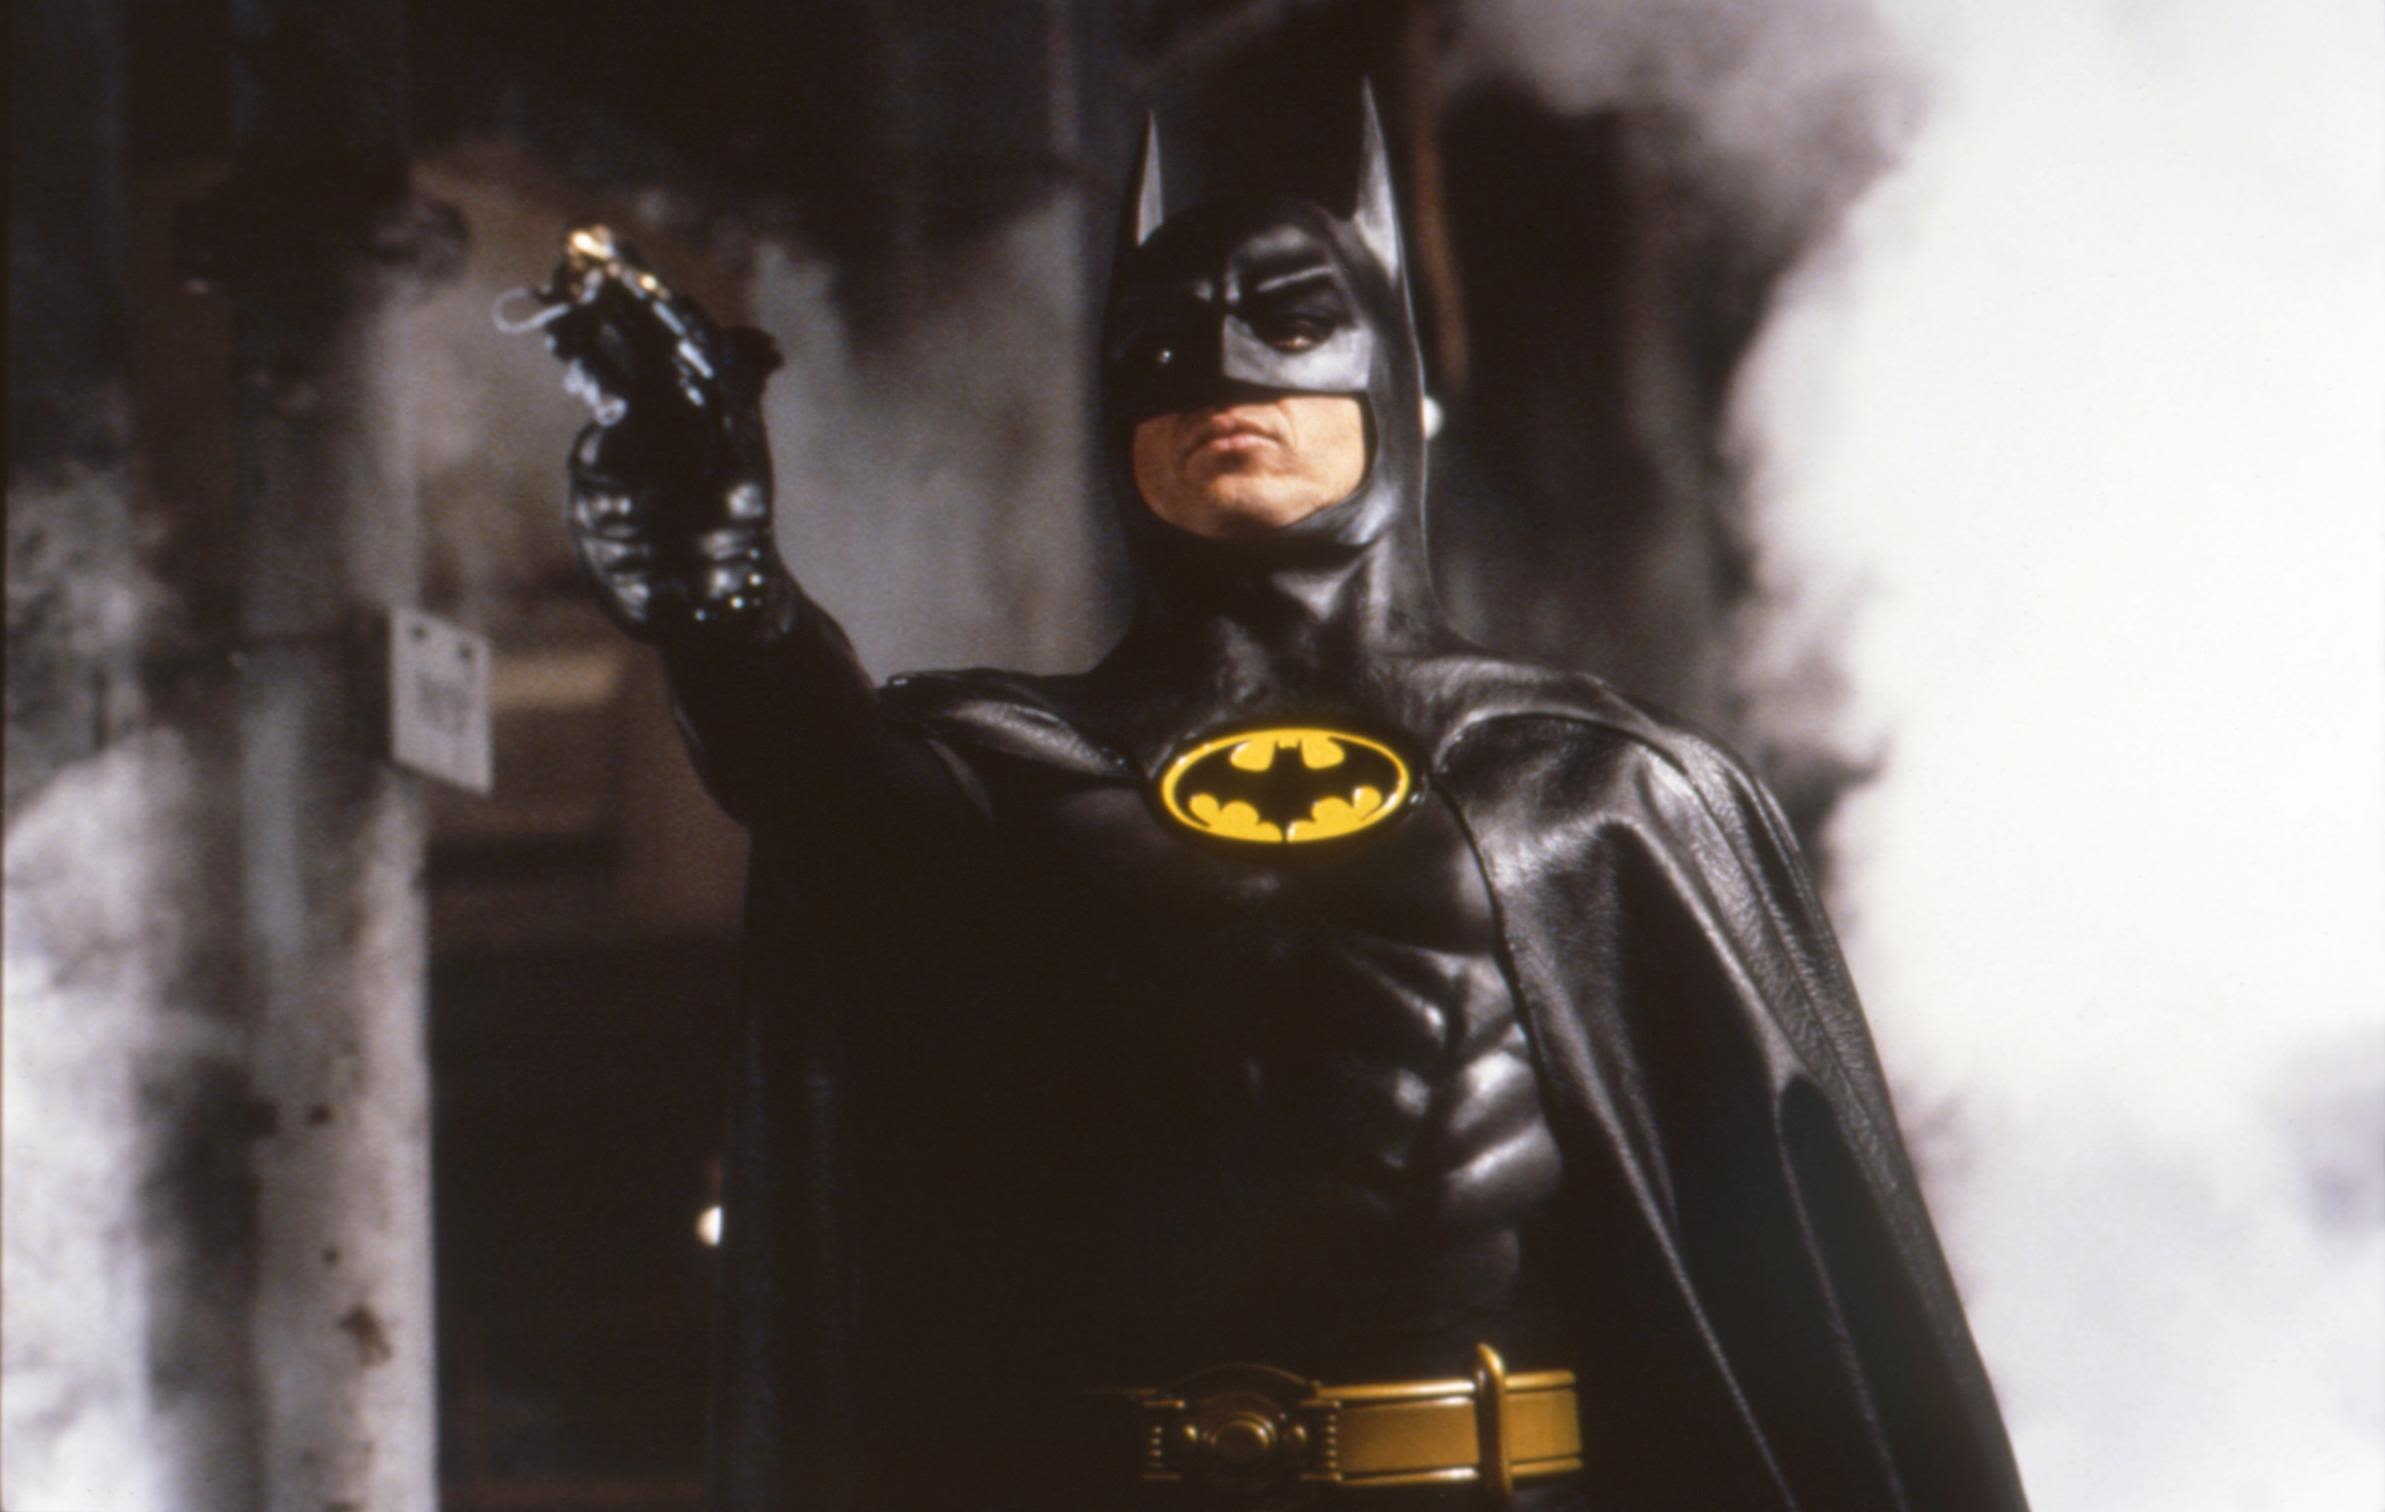 Arroyo noche Torbellino How the 1989 'Batman' movie forever changed the comic book character | CNN